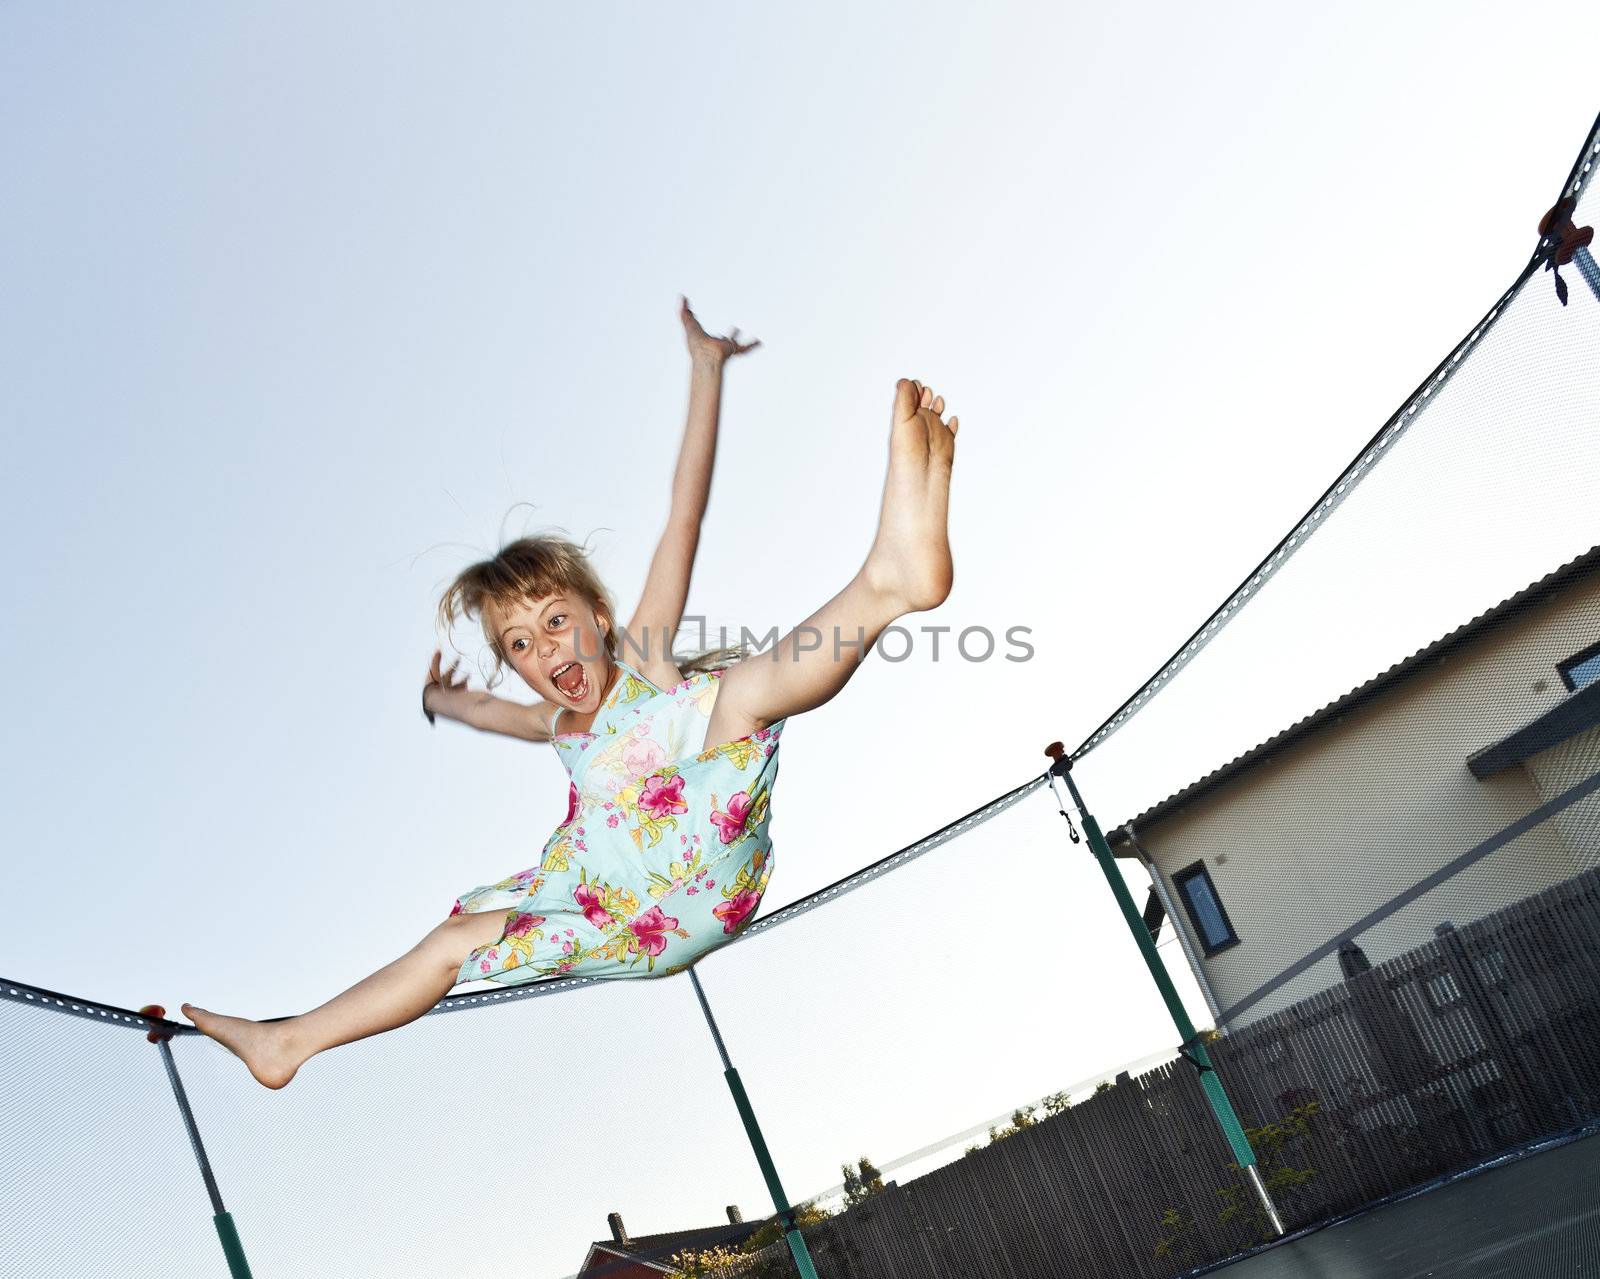 Young Girl Jumping in a trampoline